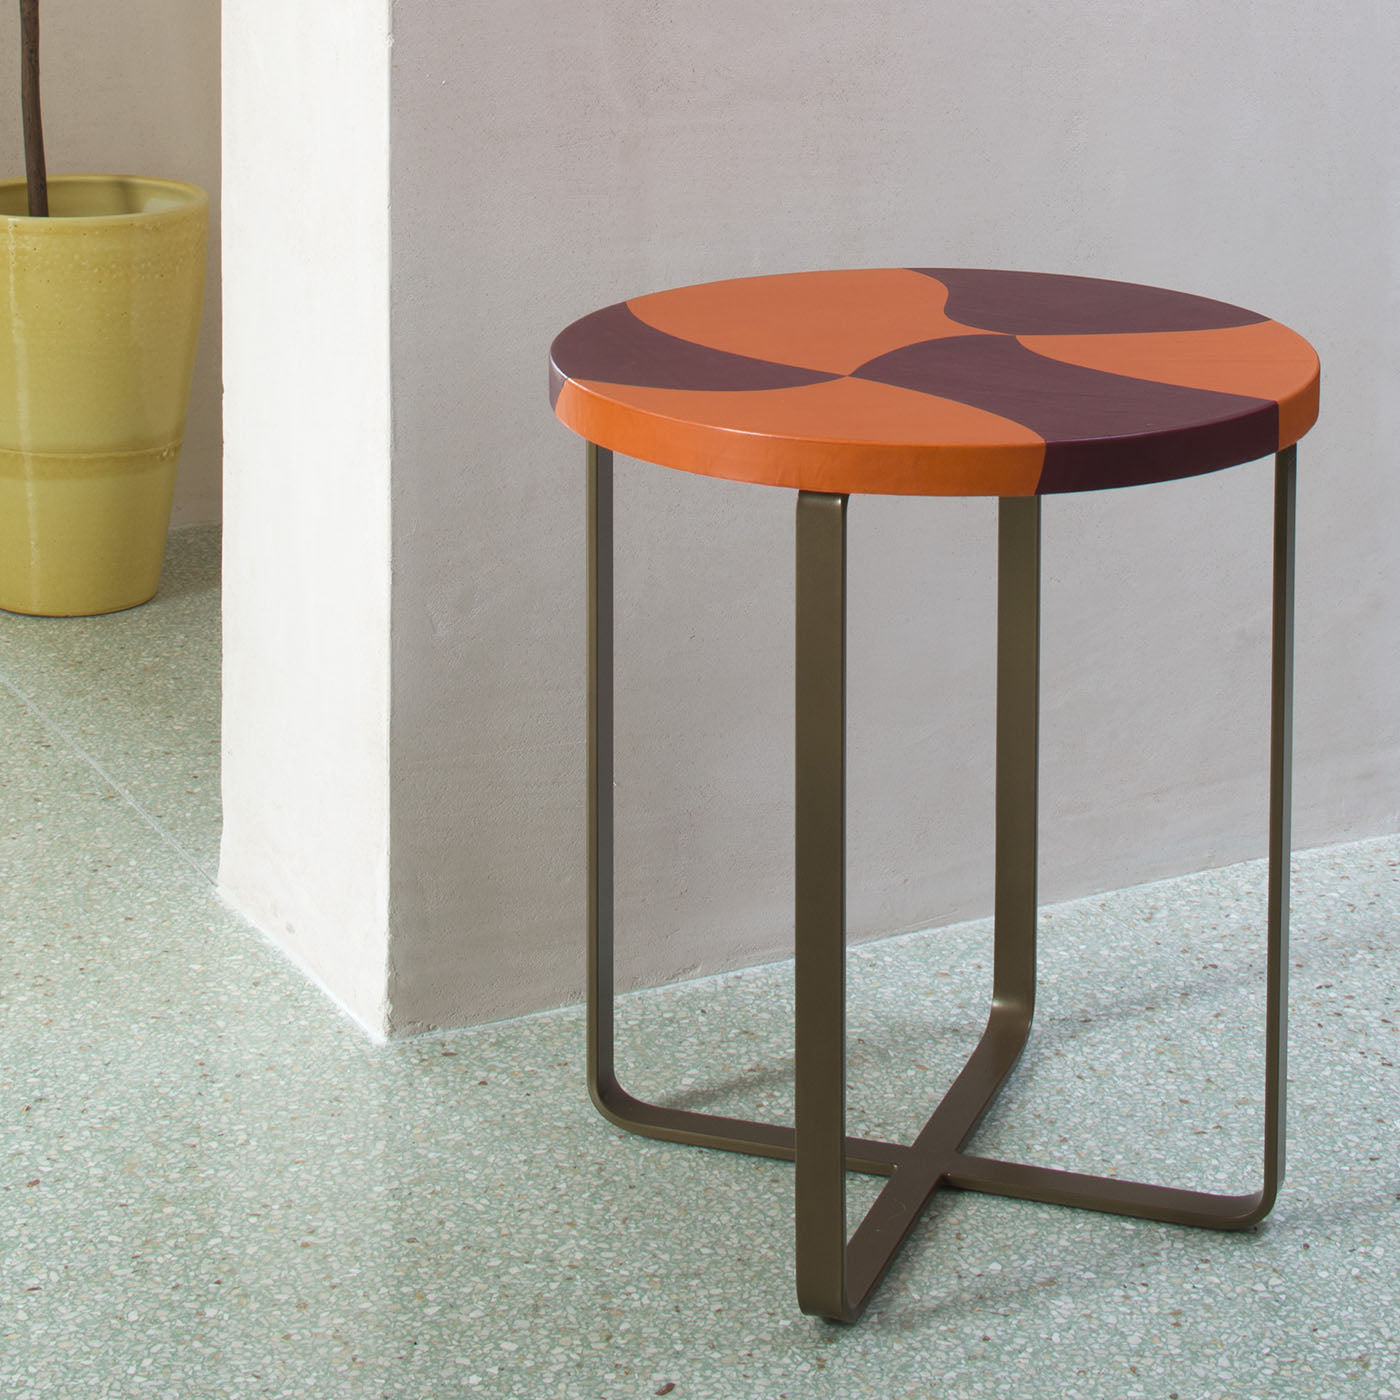 Isole Tigre Round Polychrome Side Table by Nestor Perkal - Alternative view 2